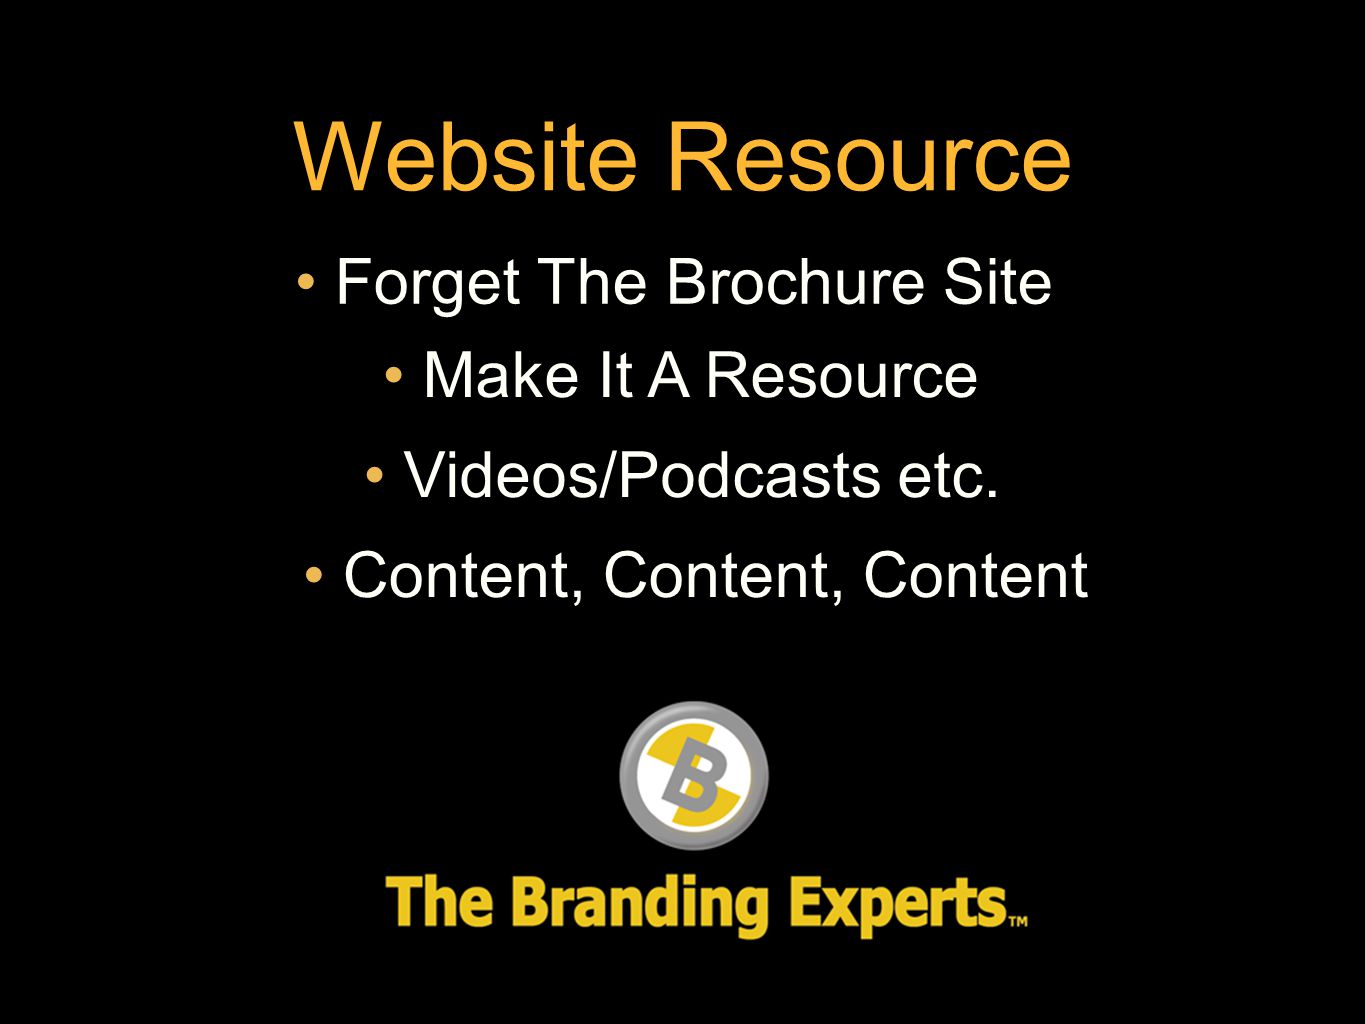 Website Resource Forget The Brochure Site Make It A Resource Videos/Podcasts etc.